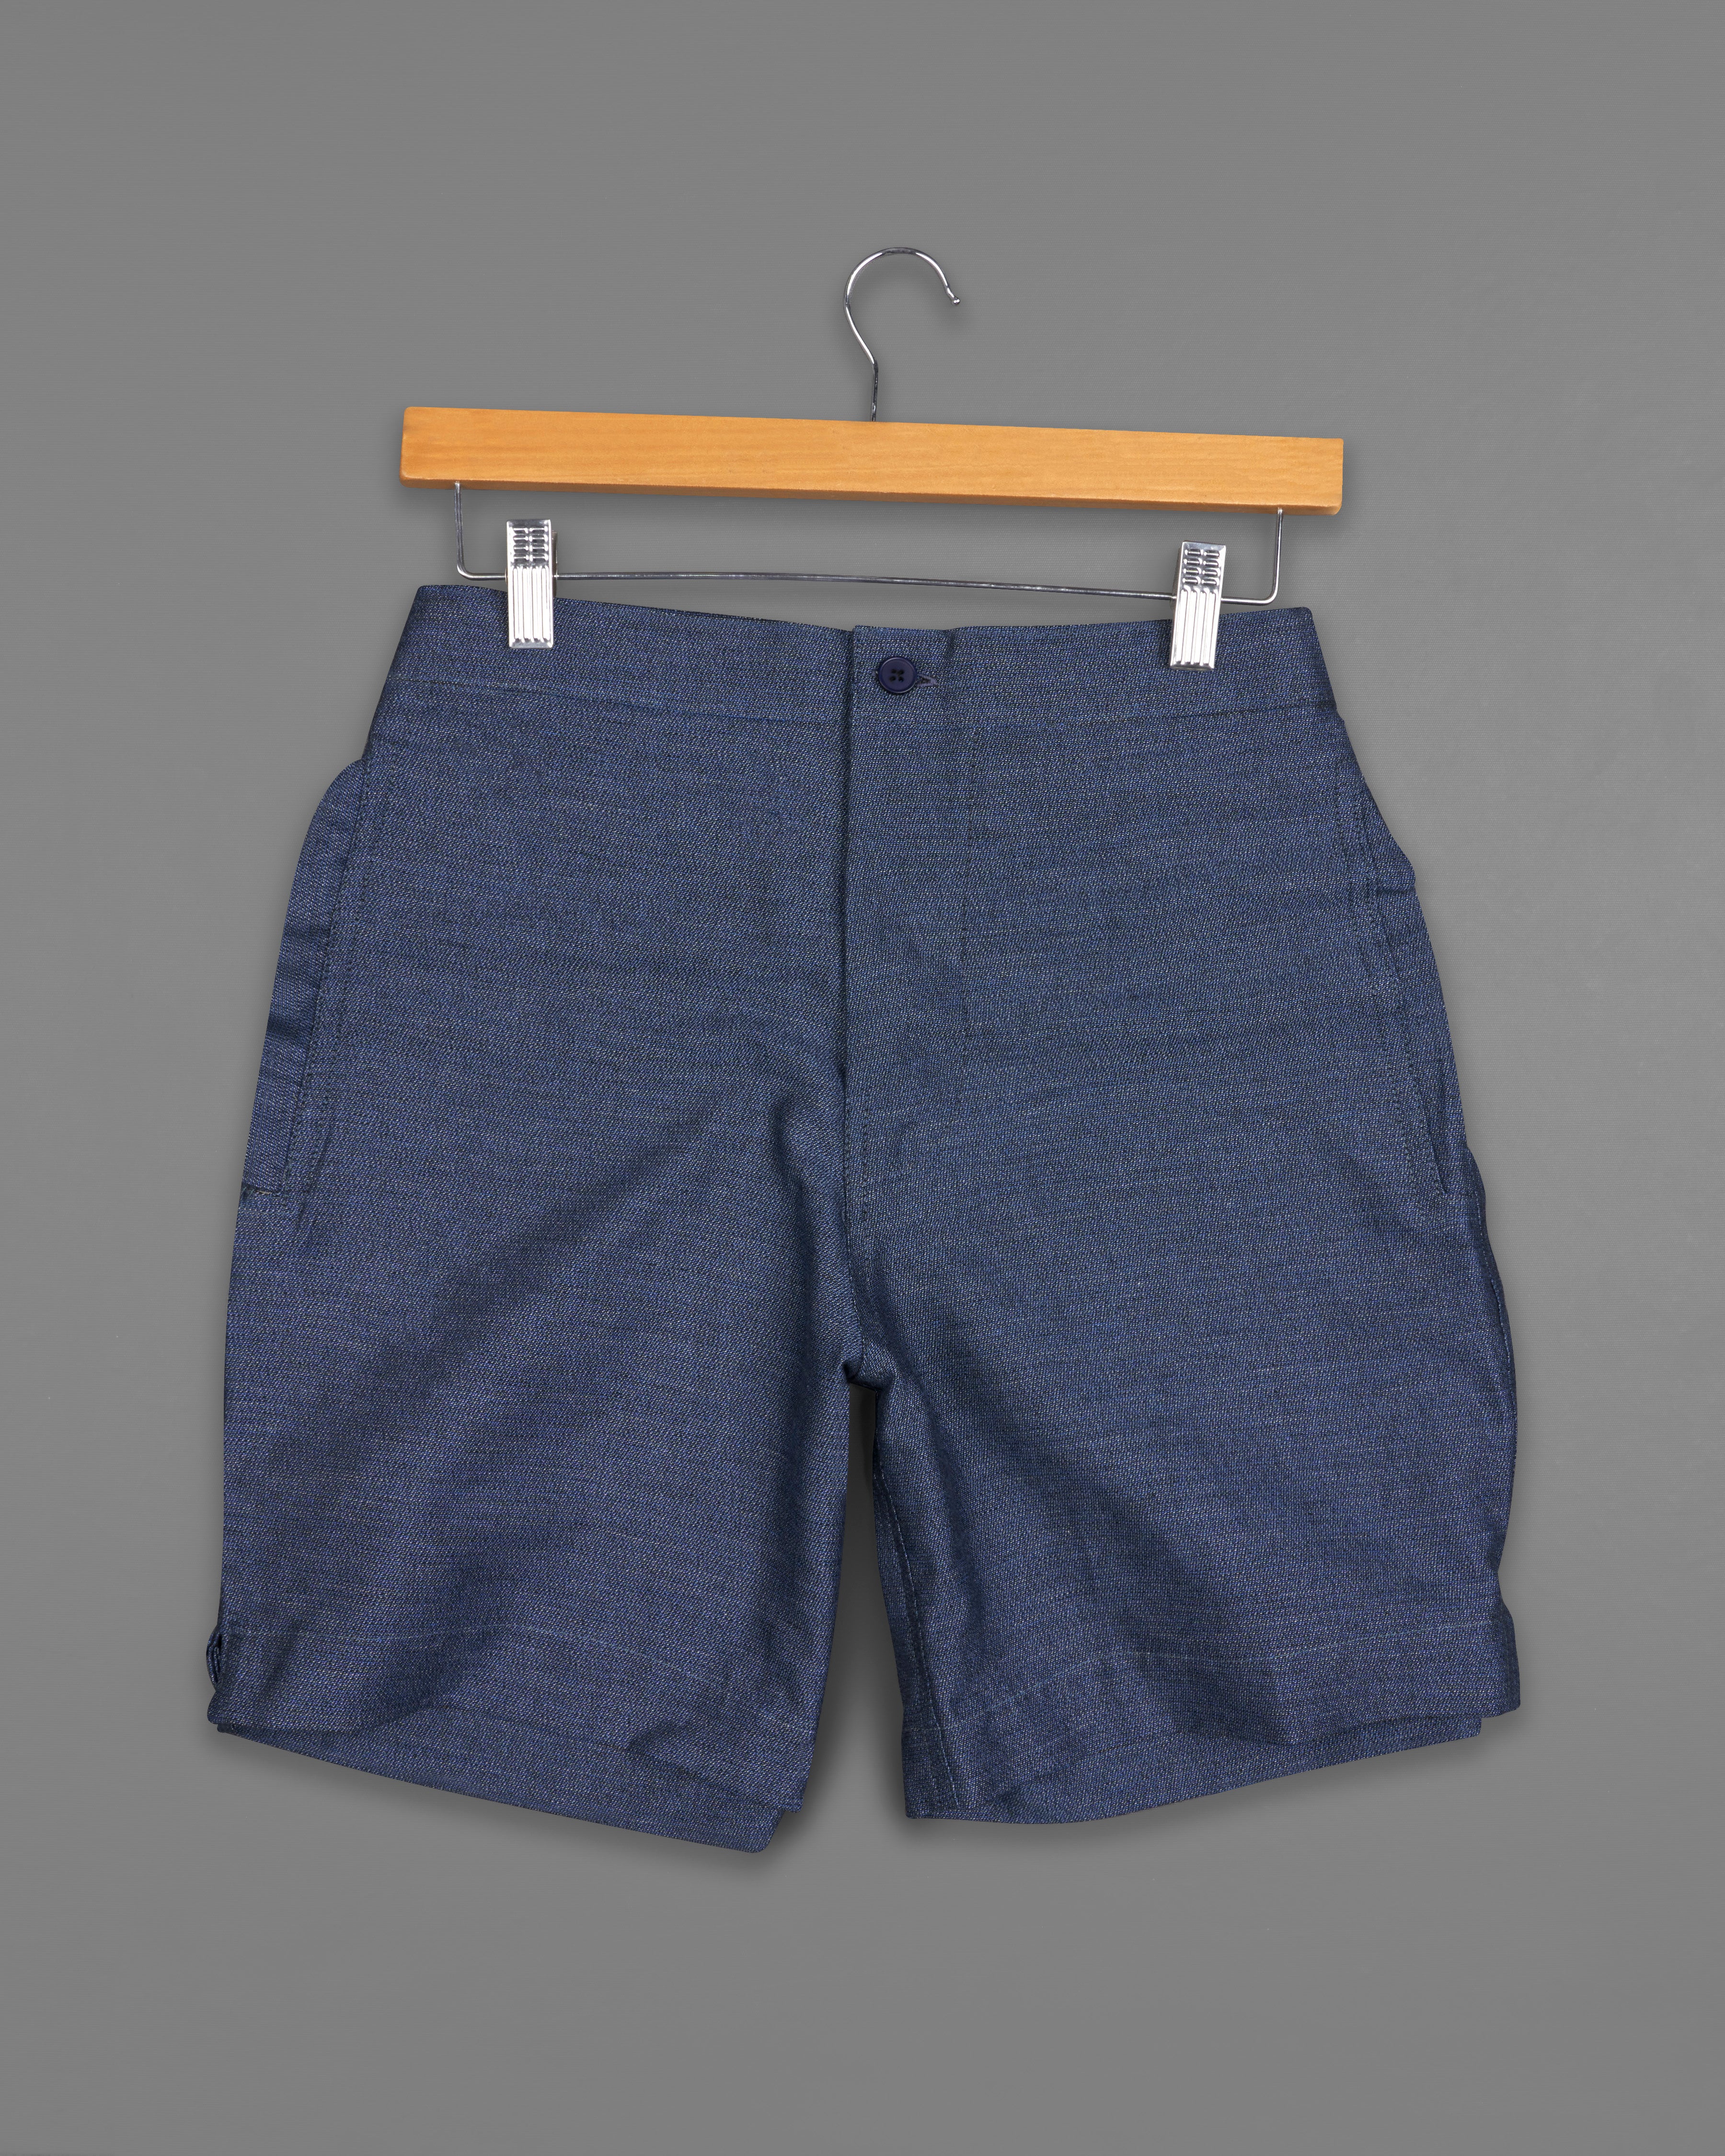 Bleached Gray Dobby Textured Giza Cotton Shorts SR228-28, SR228-30, SR228-32, SR228-34, SR228-36, SR228-38, SR228-40, SR228-42, SR228-44